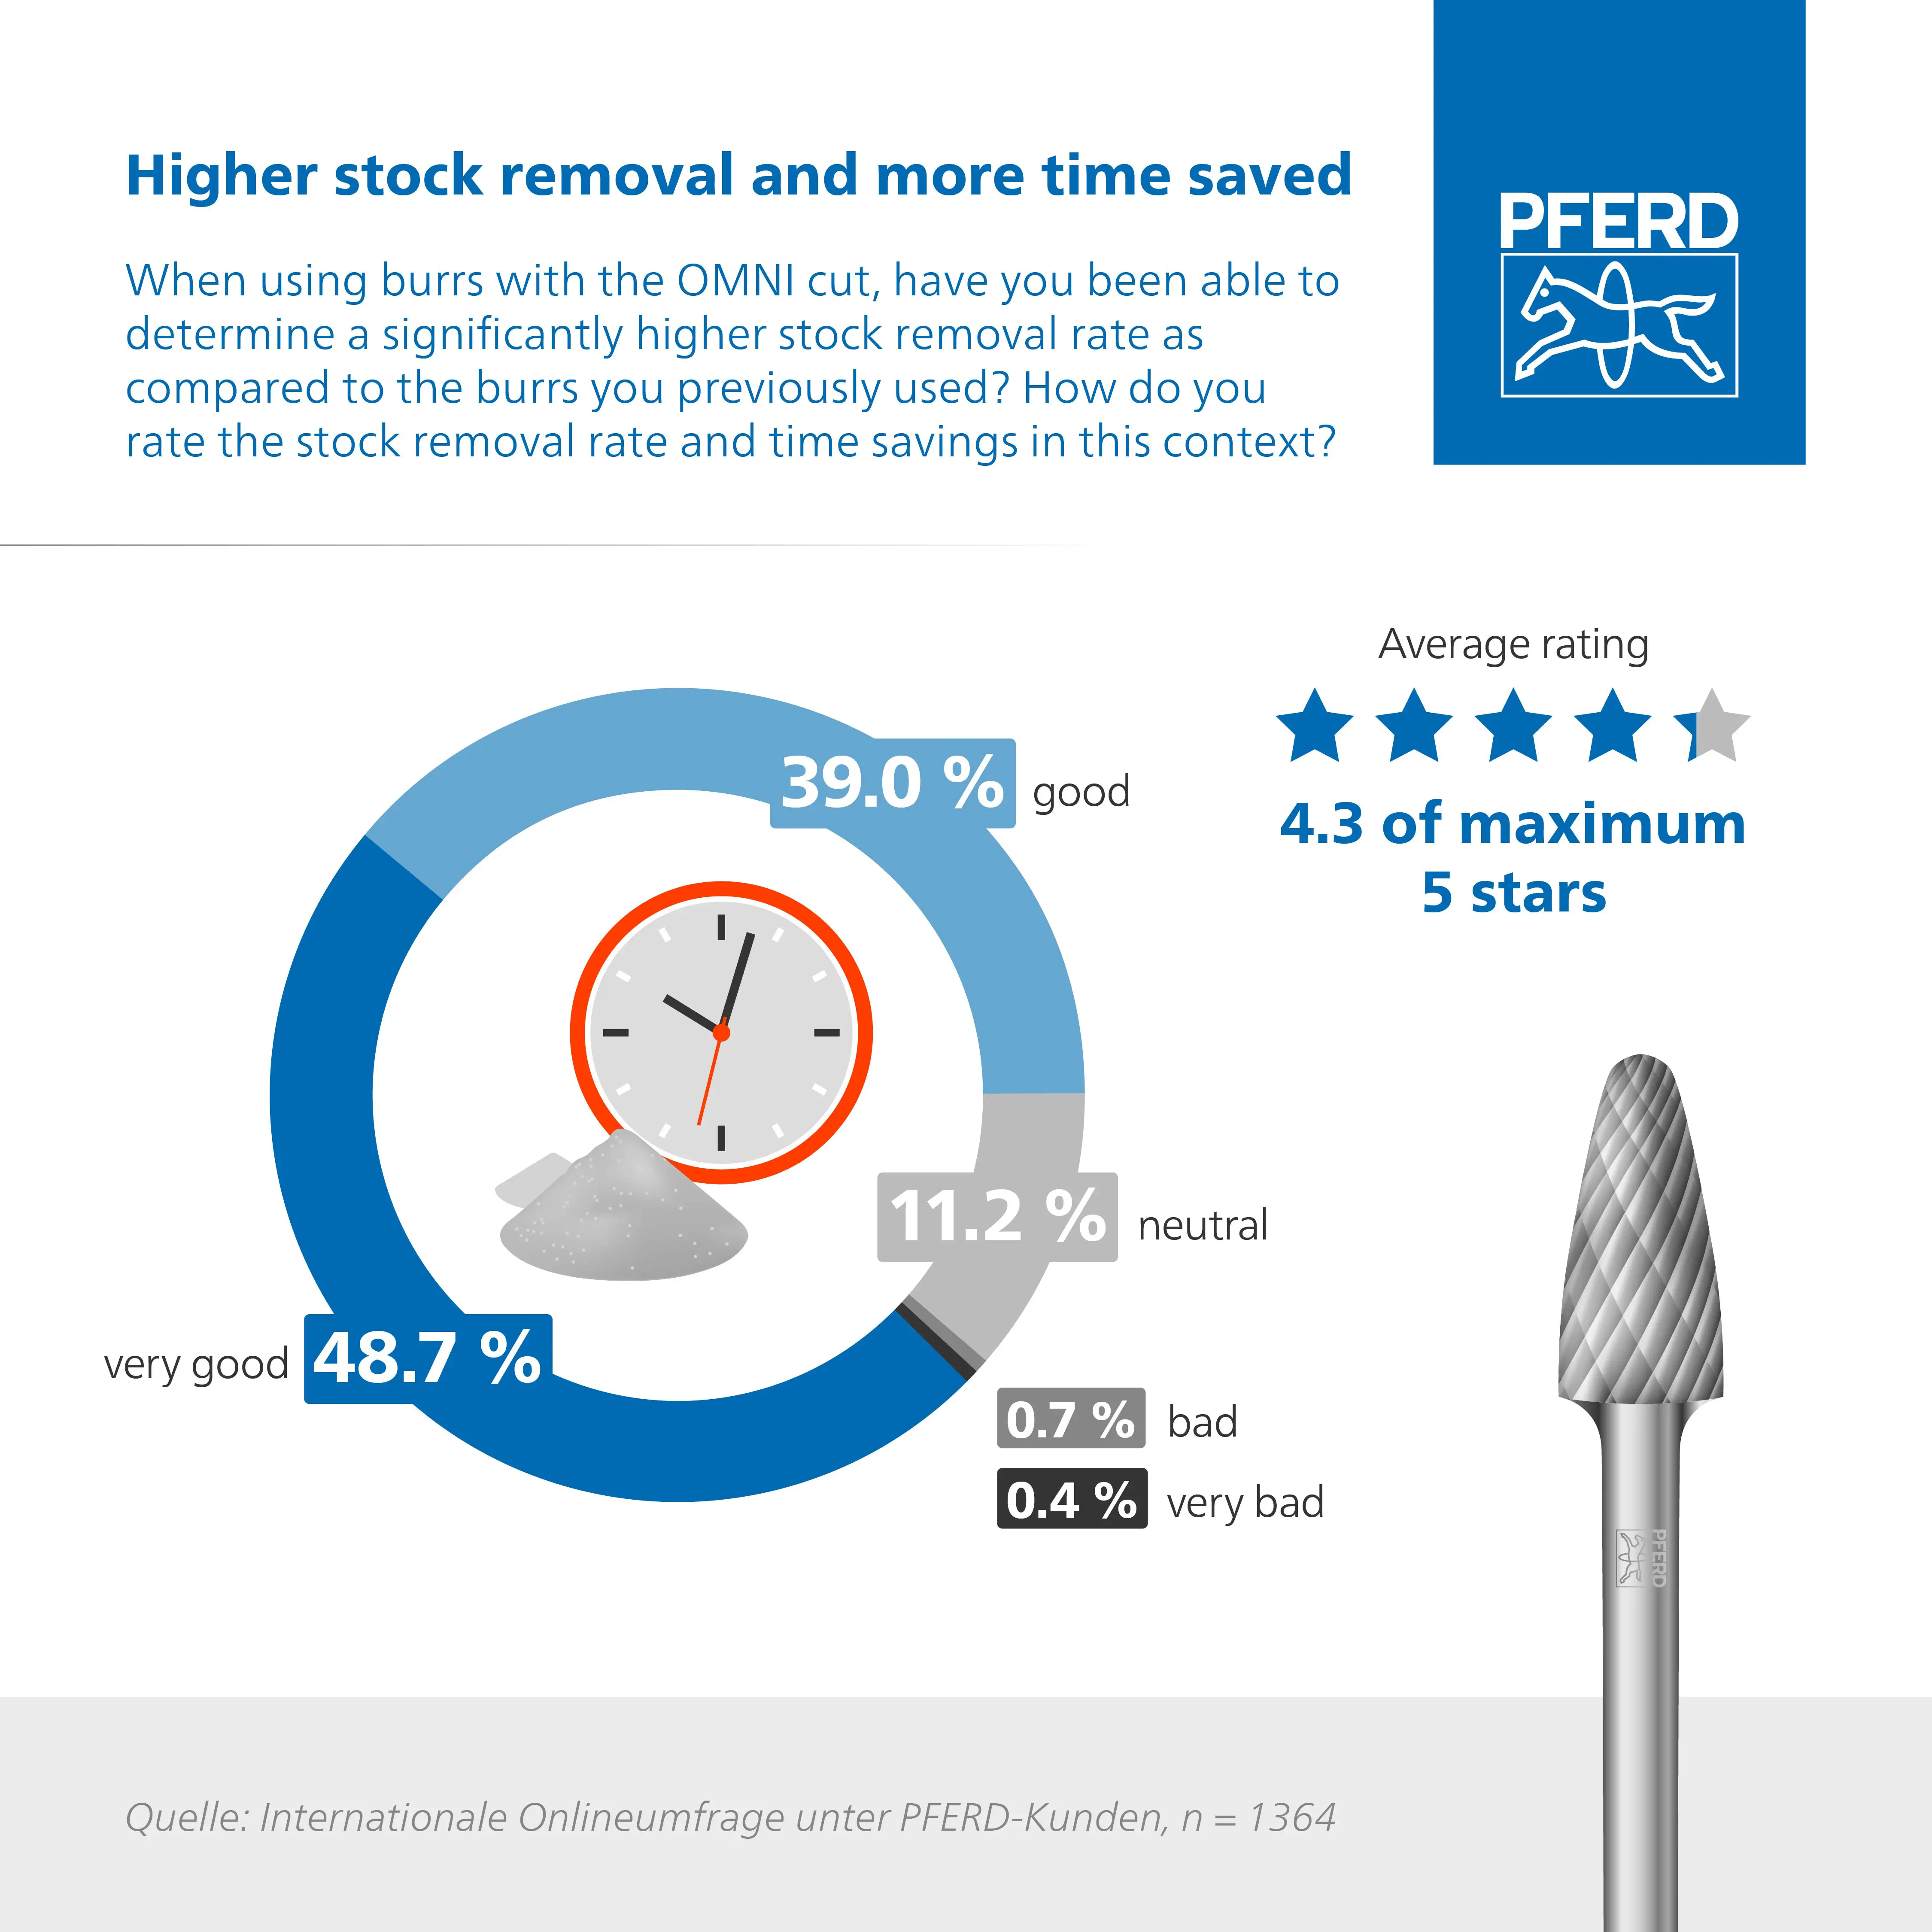 Higher stock removal and more time saved.